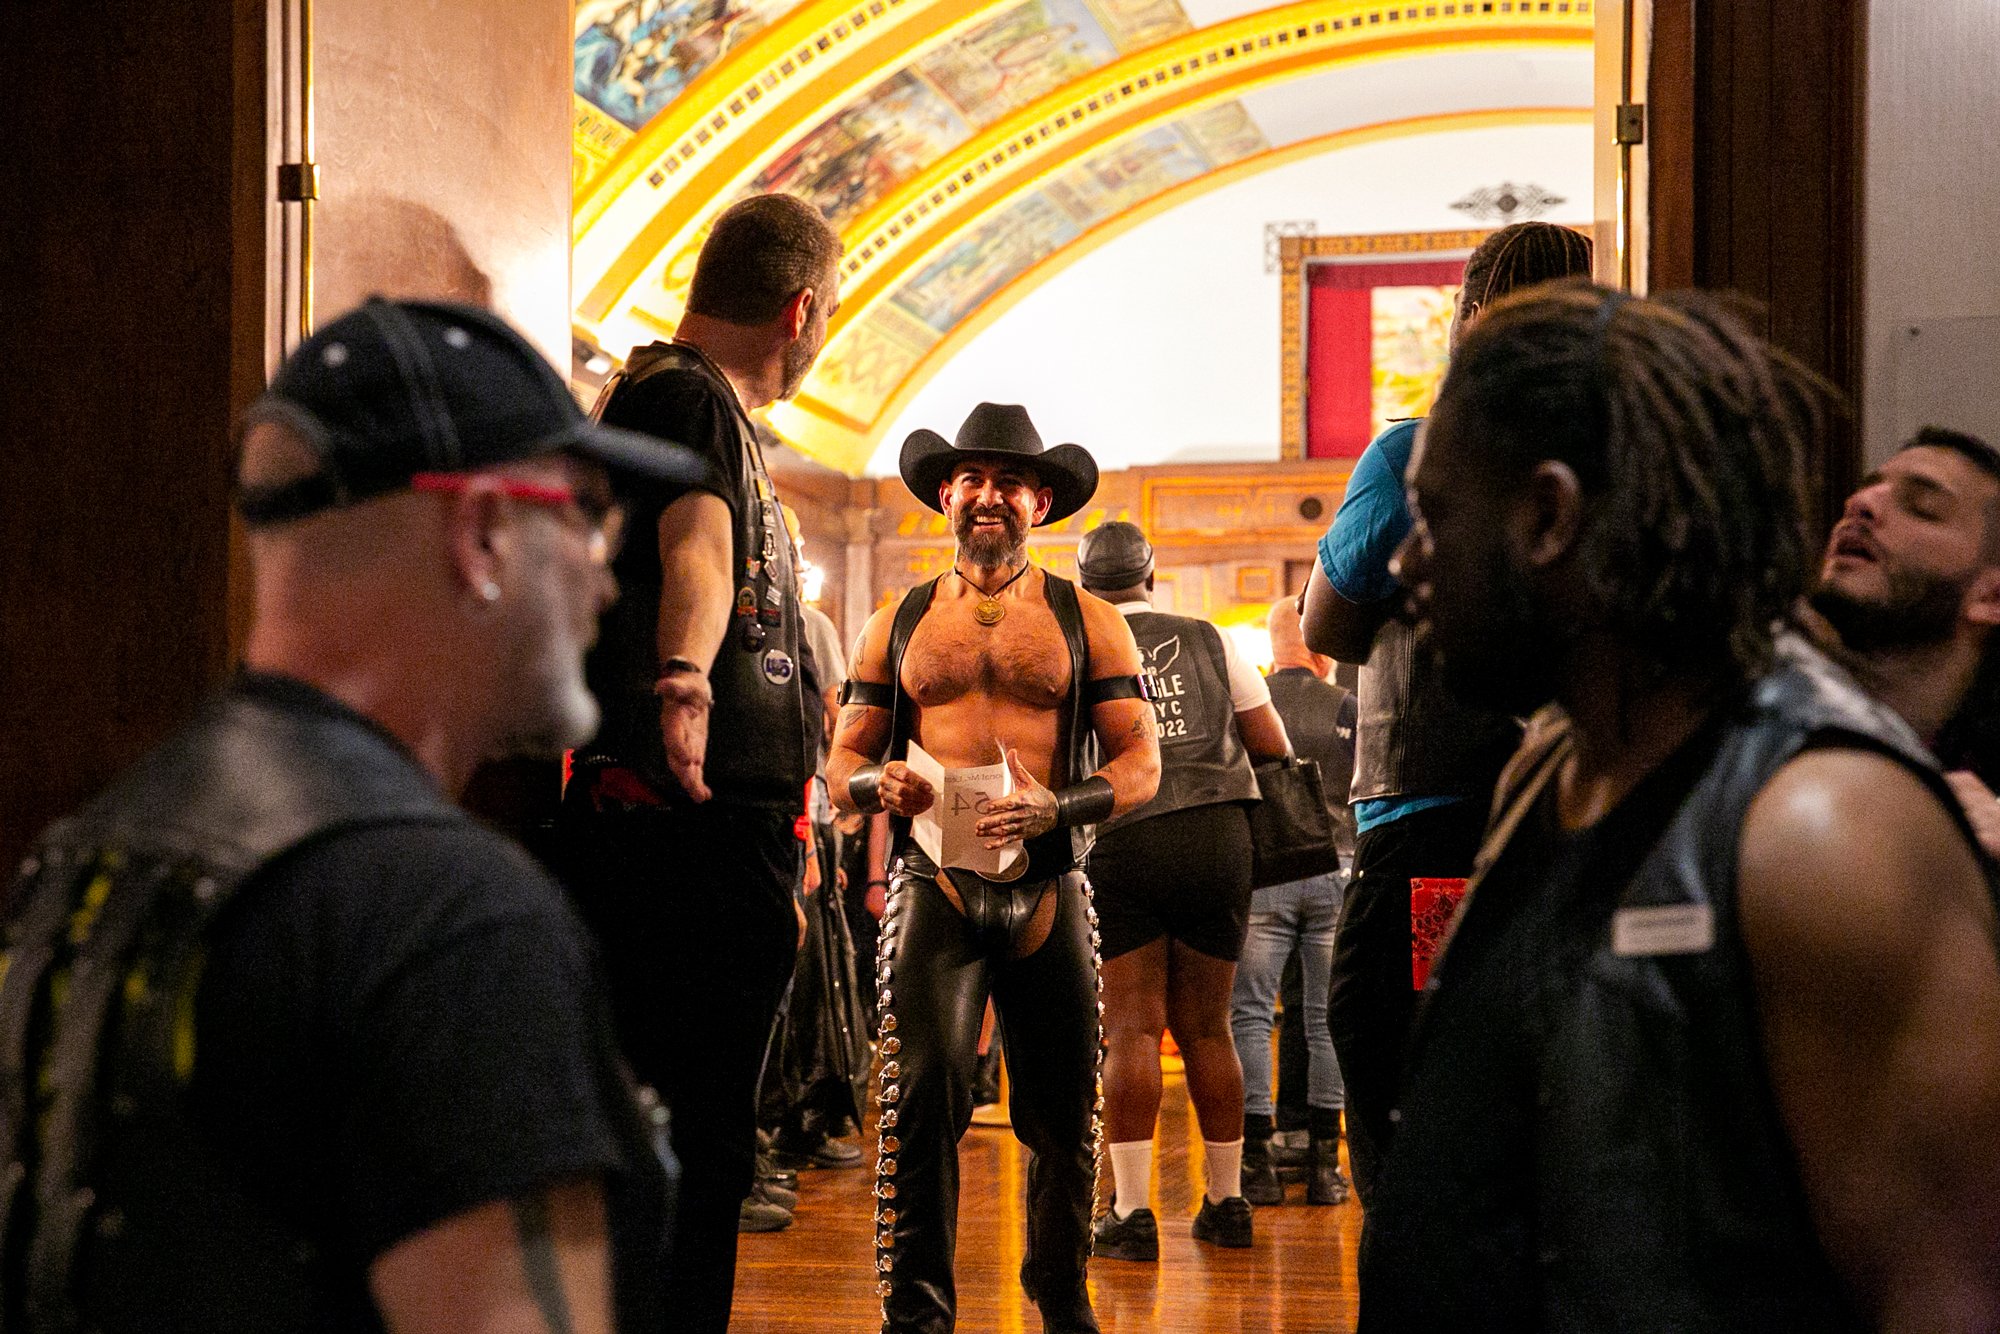  Marcus Barela, Mr. Eagle LA 2020, leaves the Florentine Room after receiving his competition number during the  Opening Ceremonies of International Mister Leather 45, held at The Congress Plaza Hotel, Thursday May 25, 2023, Chicago, IL.  Barela even